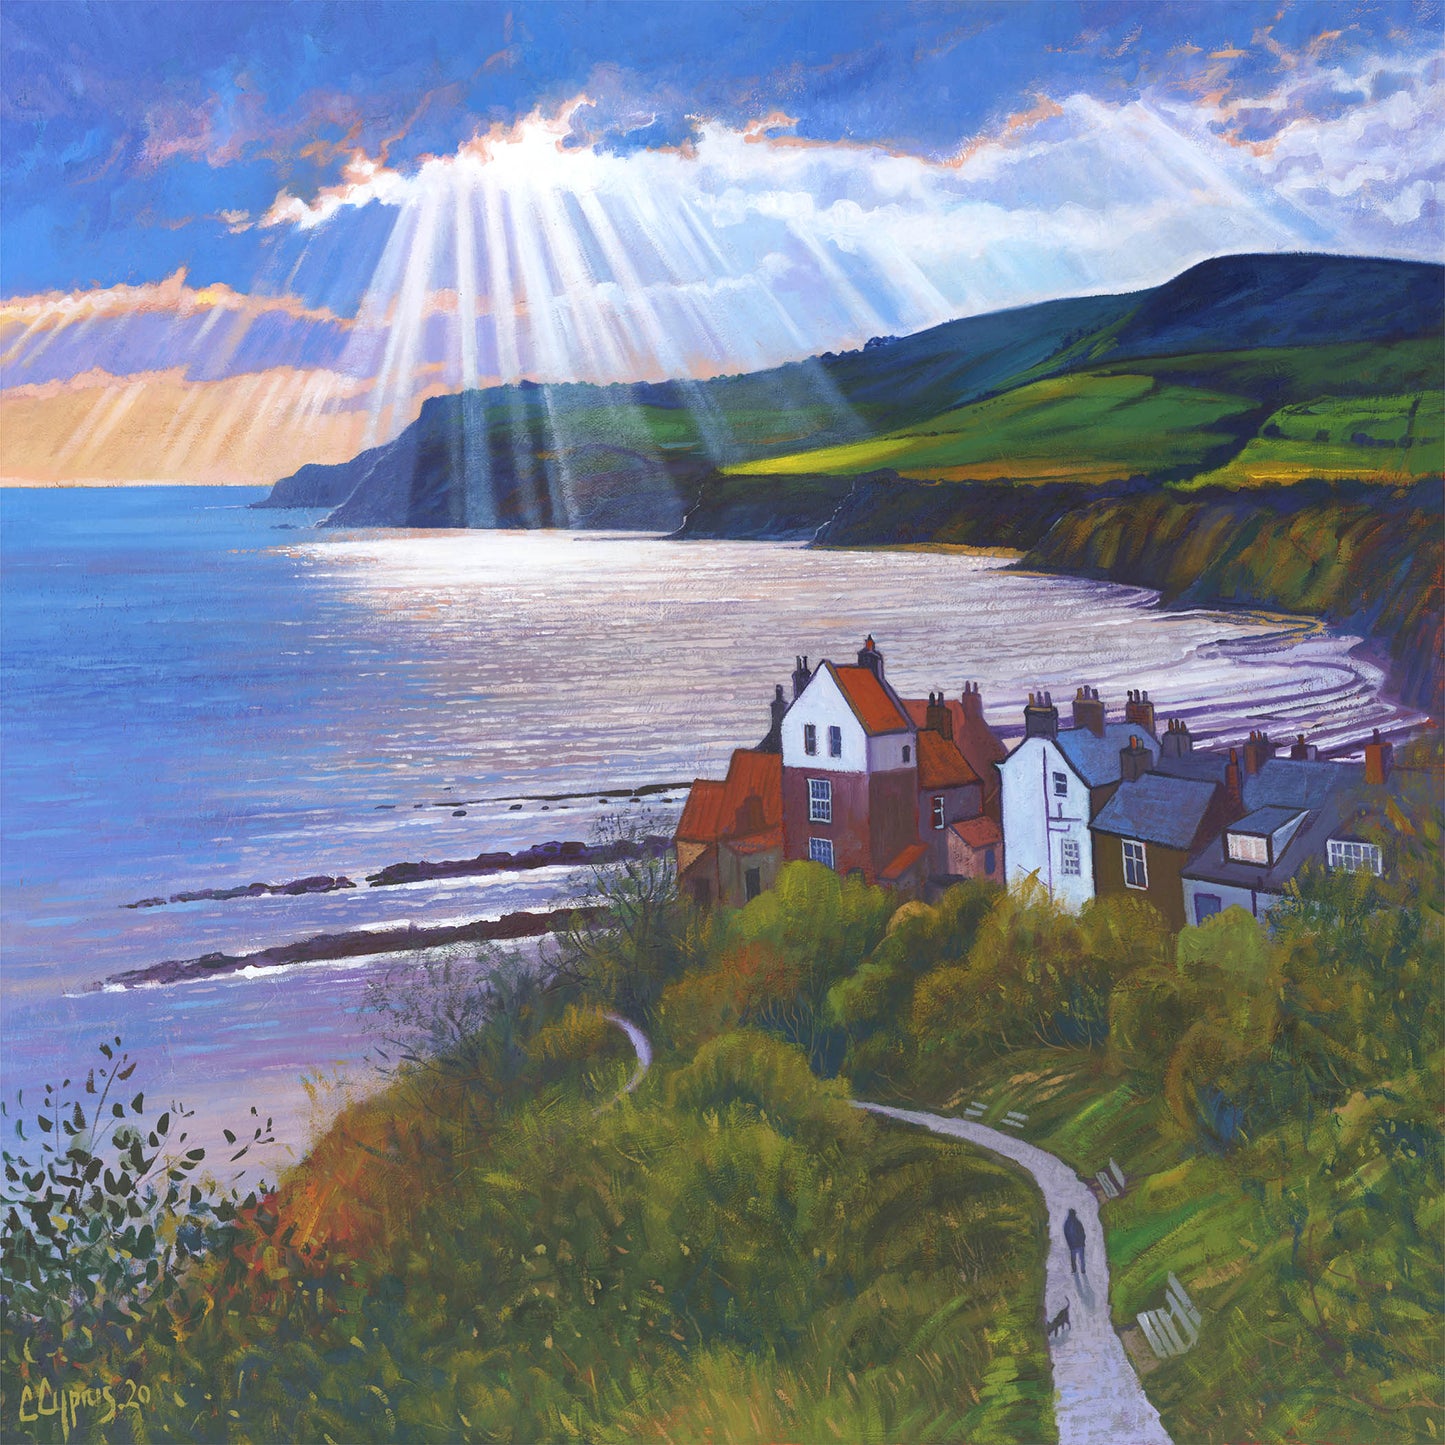 Reproduced from the original oil painting completed in 2020.  The scene features the famous headland view over the stunning Robin Hoods Bay, Northeast Coast UK.   Actual size of artwork  40cm x 40cm       Signed and embossed     Unique certificate of authentication     Limited run of 50     Printed on 300gsm archival quality paper using lightfast inks     Tube rolled for worldwide shipping   